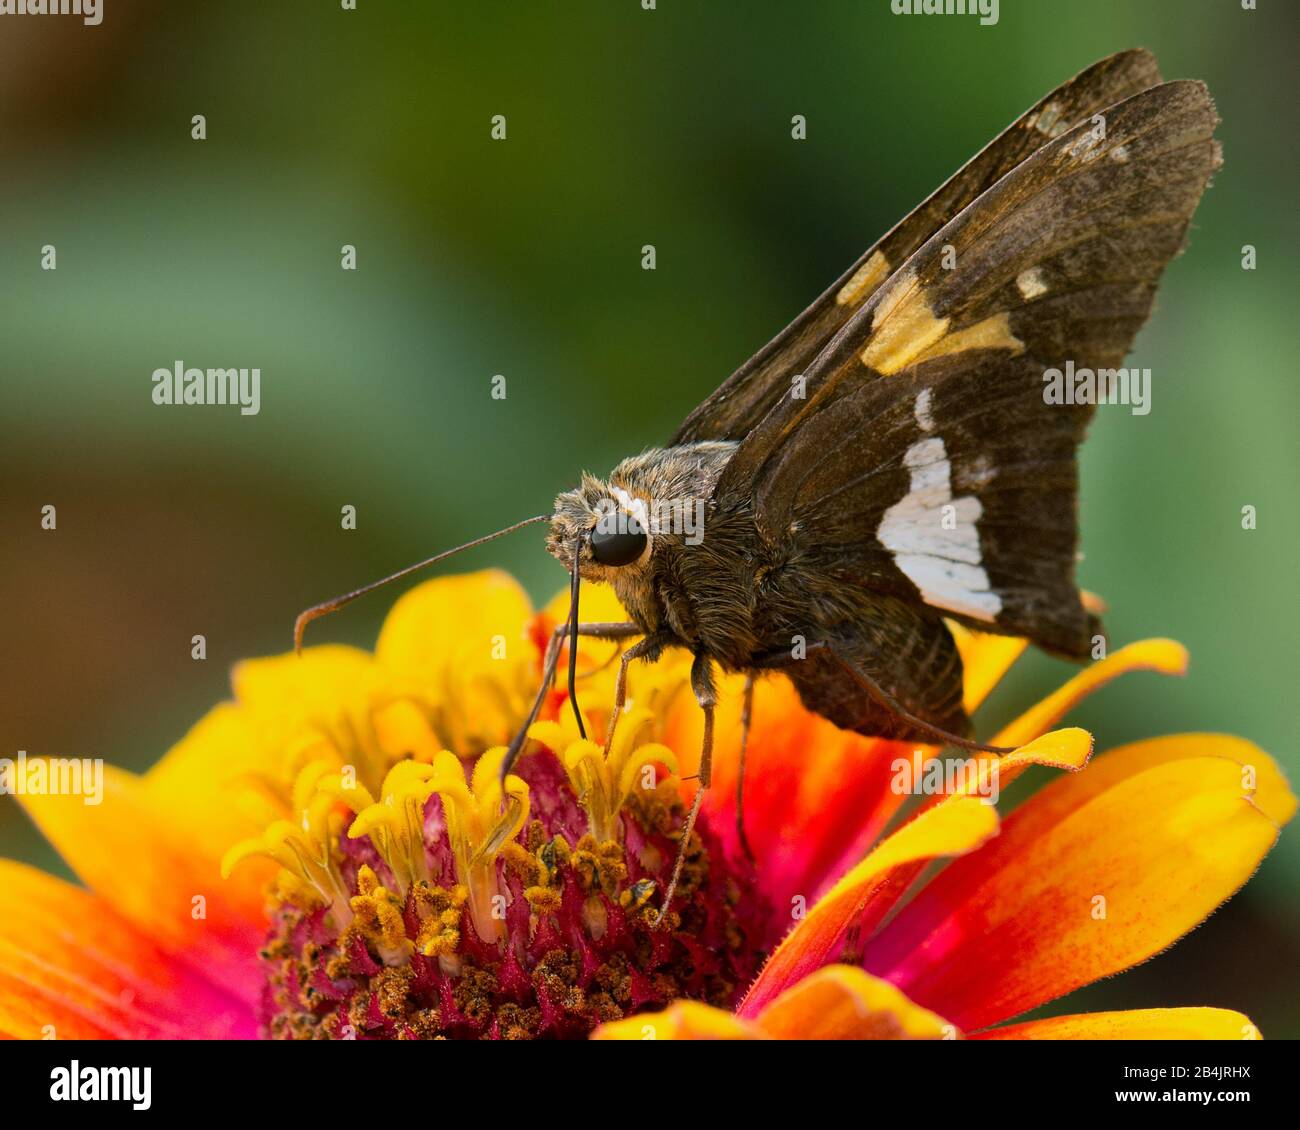 Closeup of brown and gold butterfly known as a Silver Spotted Silver on an orange and yellow vivid flower. Stock Photo